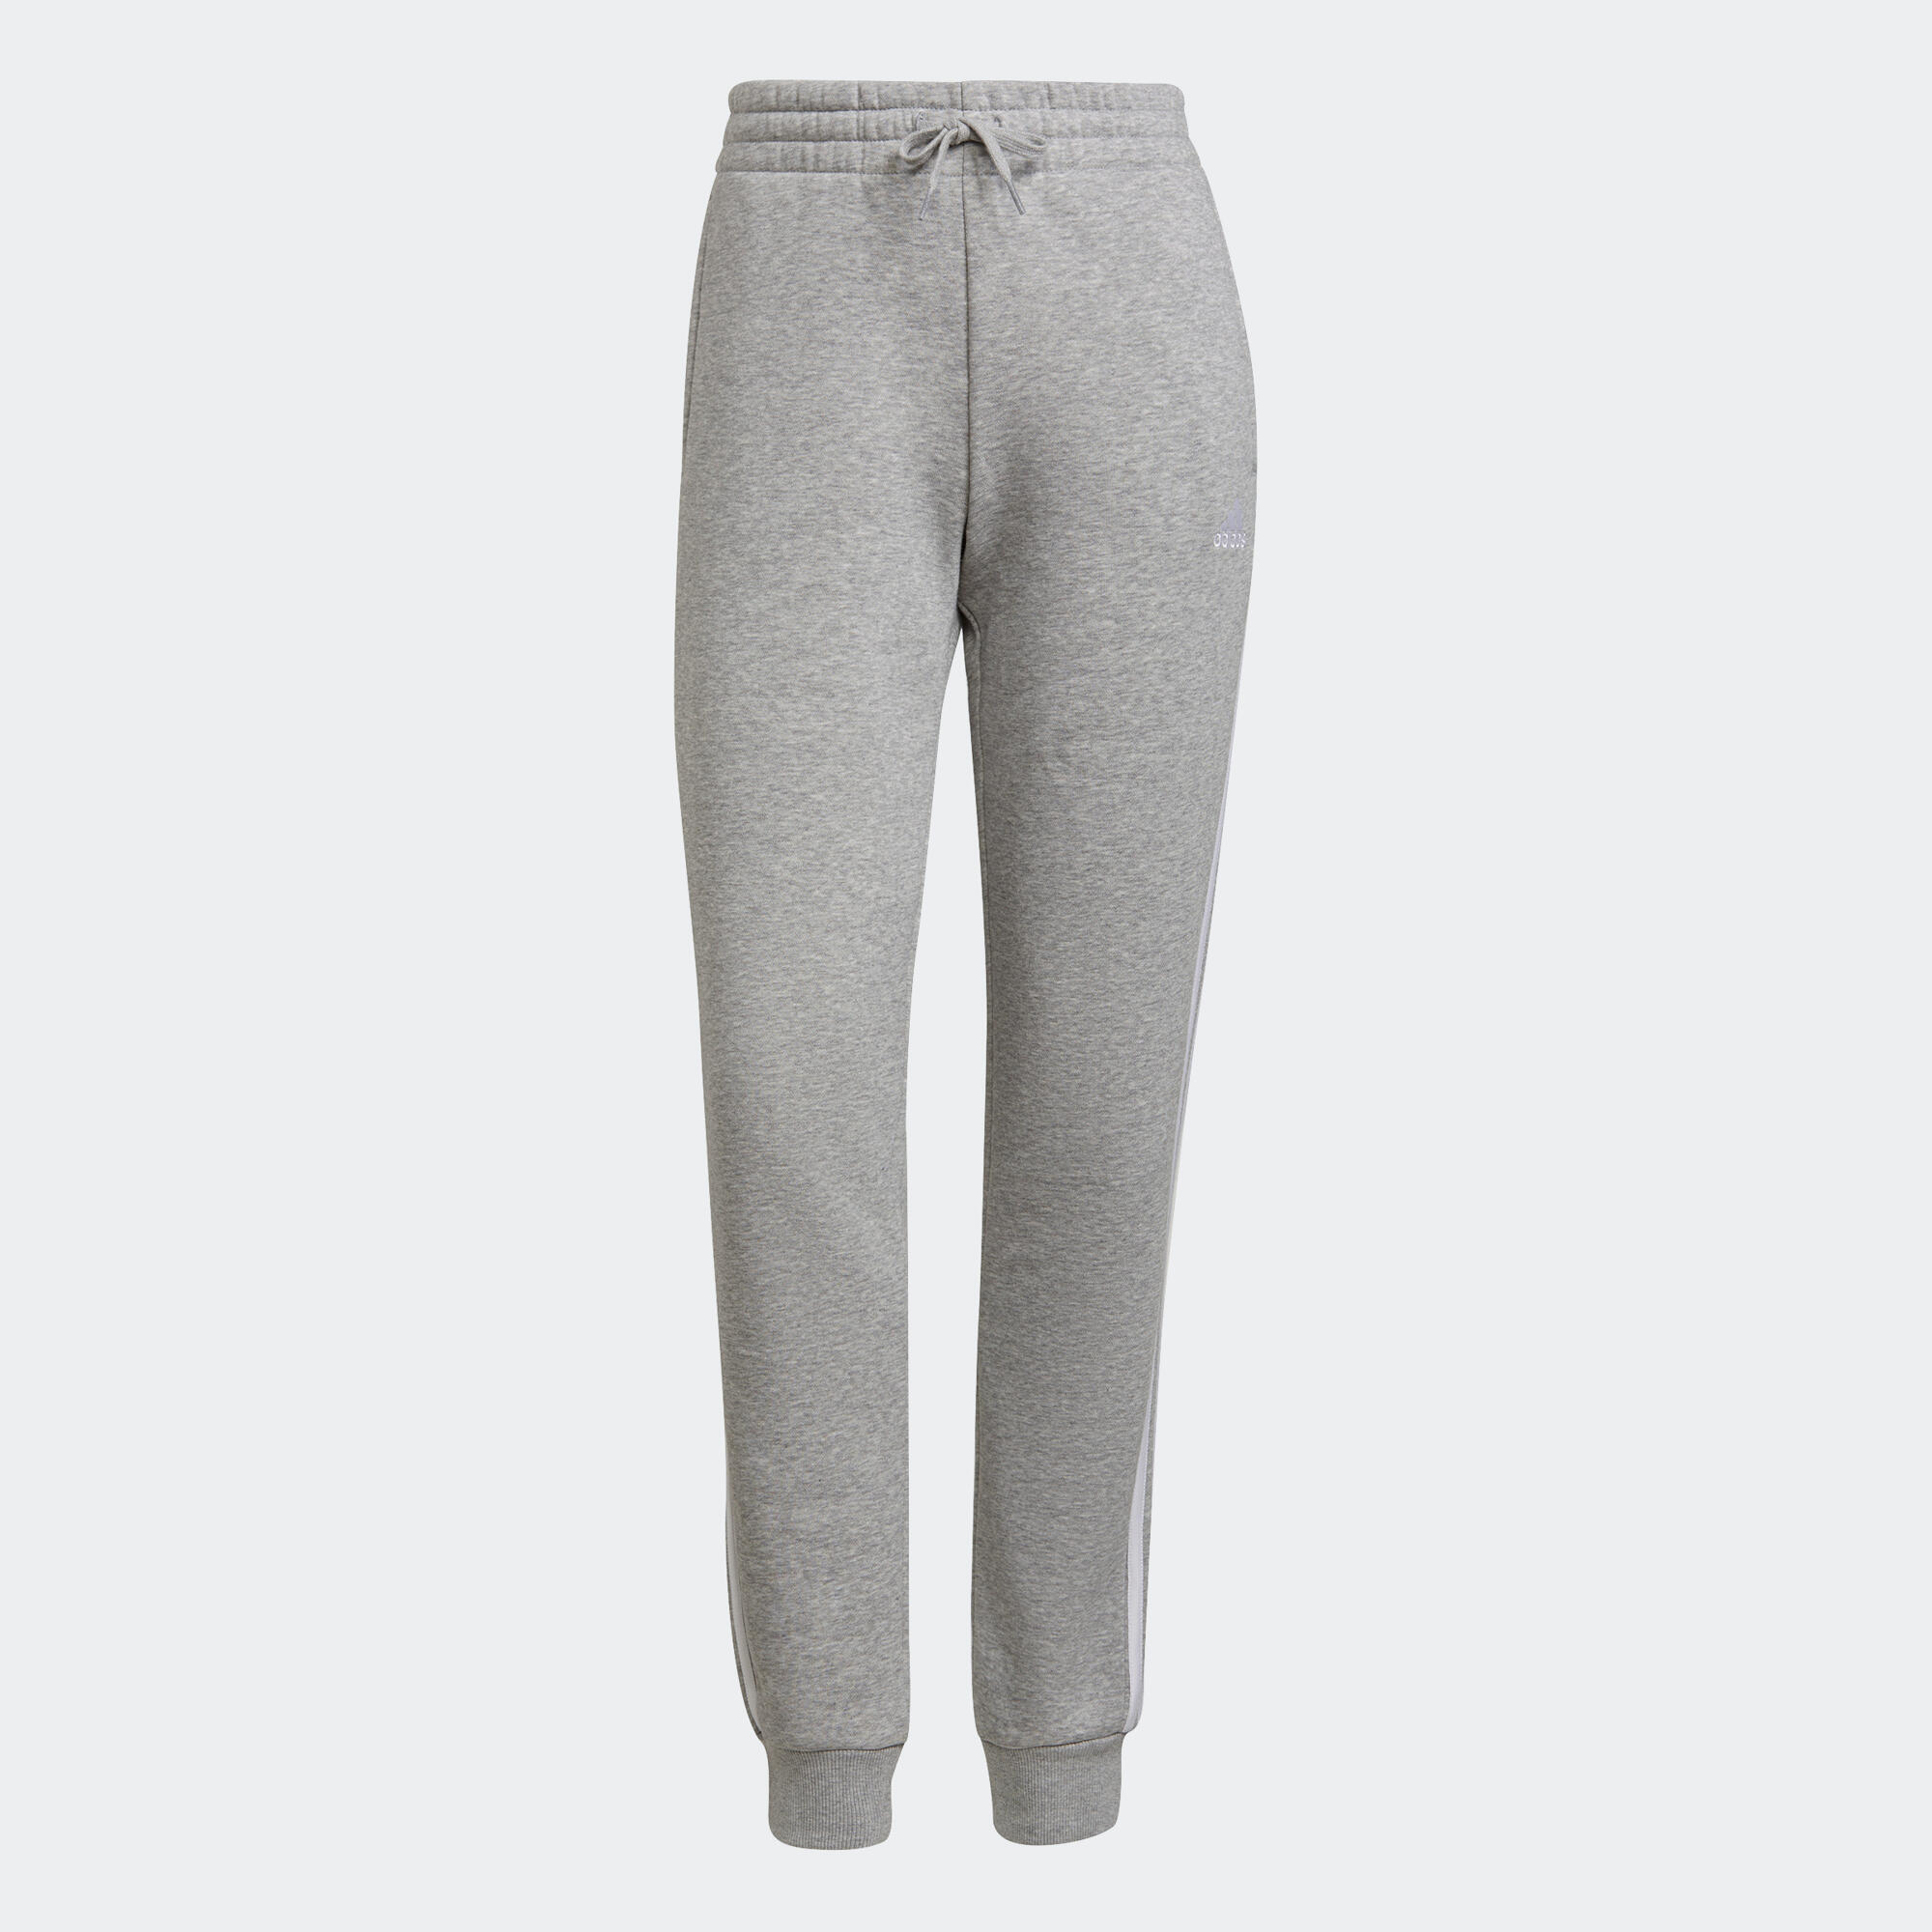 Women's Cotton-Rich Fitted Jogging Fitness Bottoms - Grey 6/6